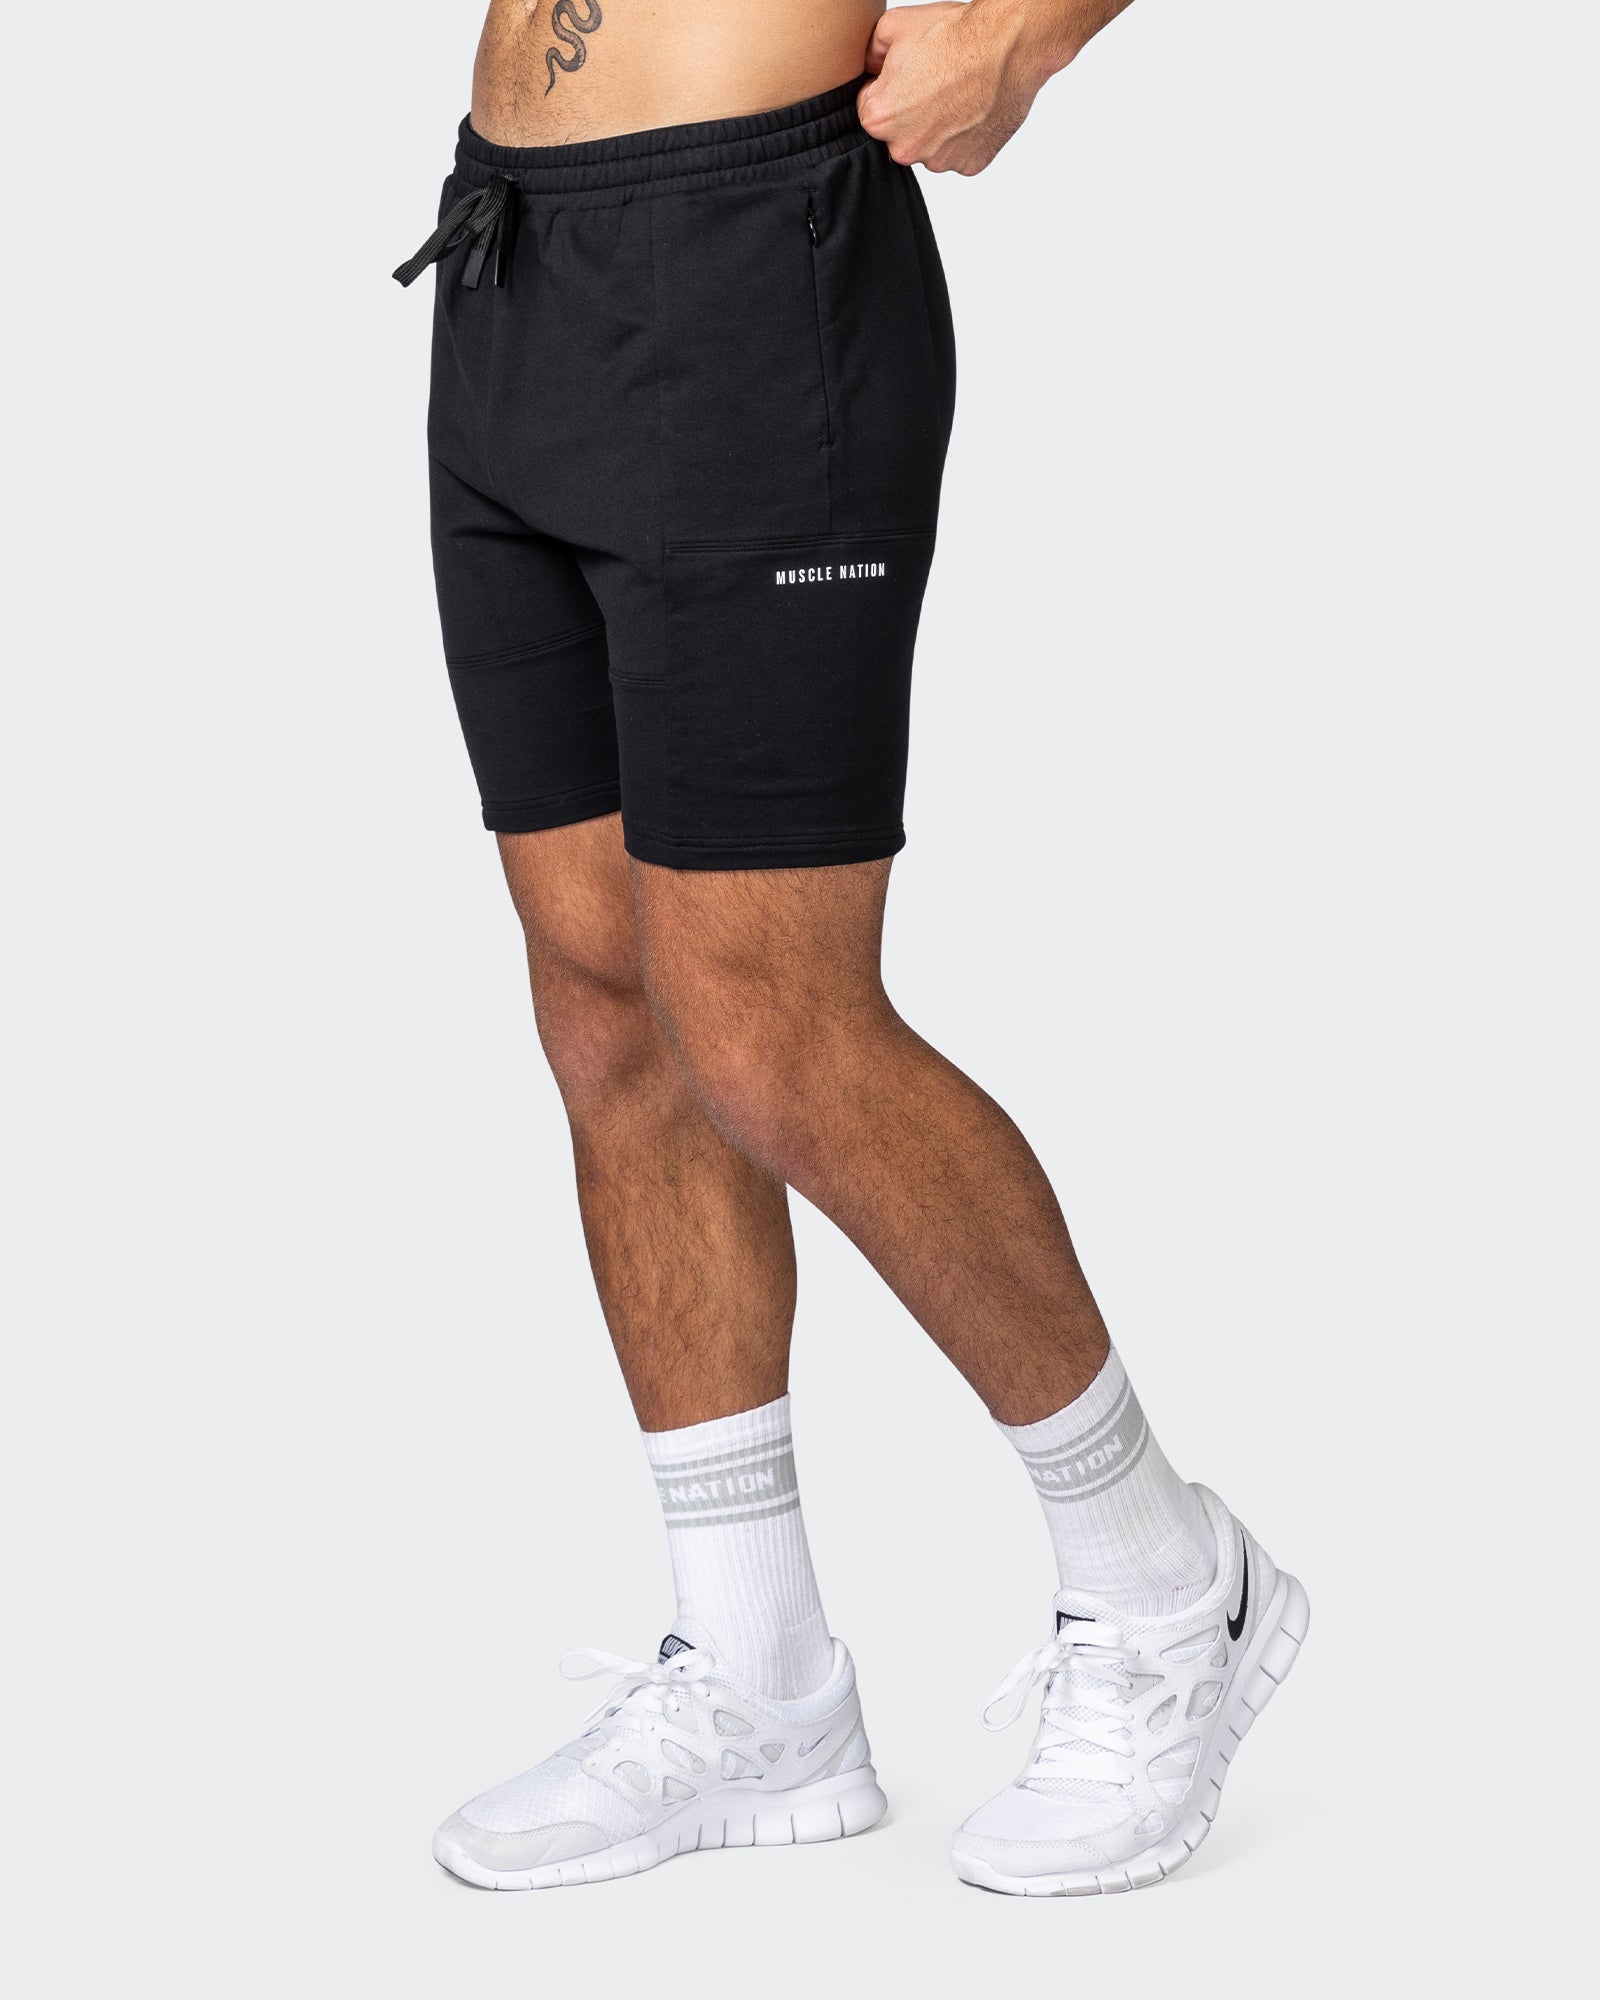 Combine Tapered Shorts - Black - Muscle Nation